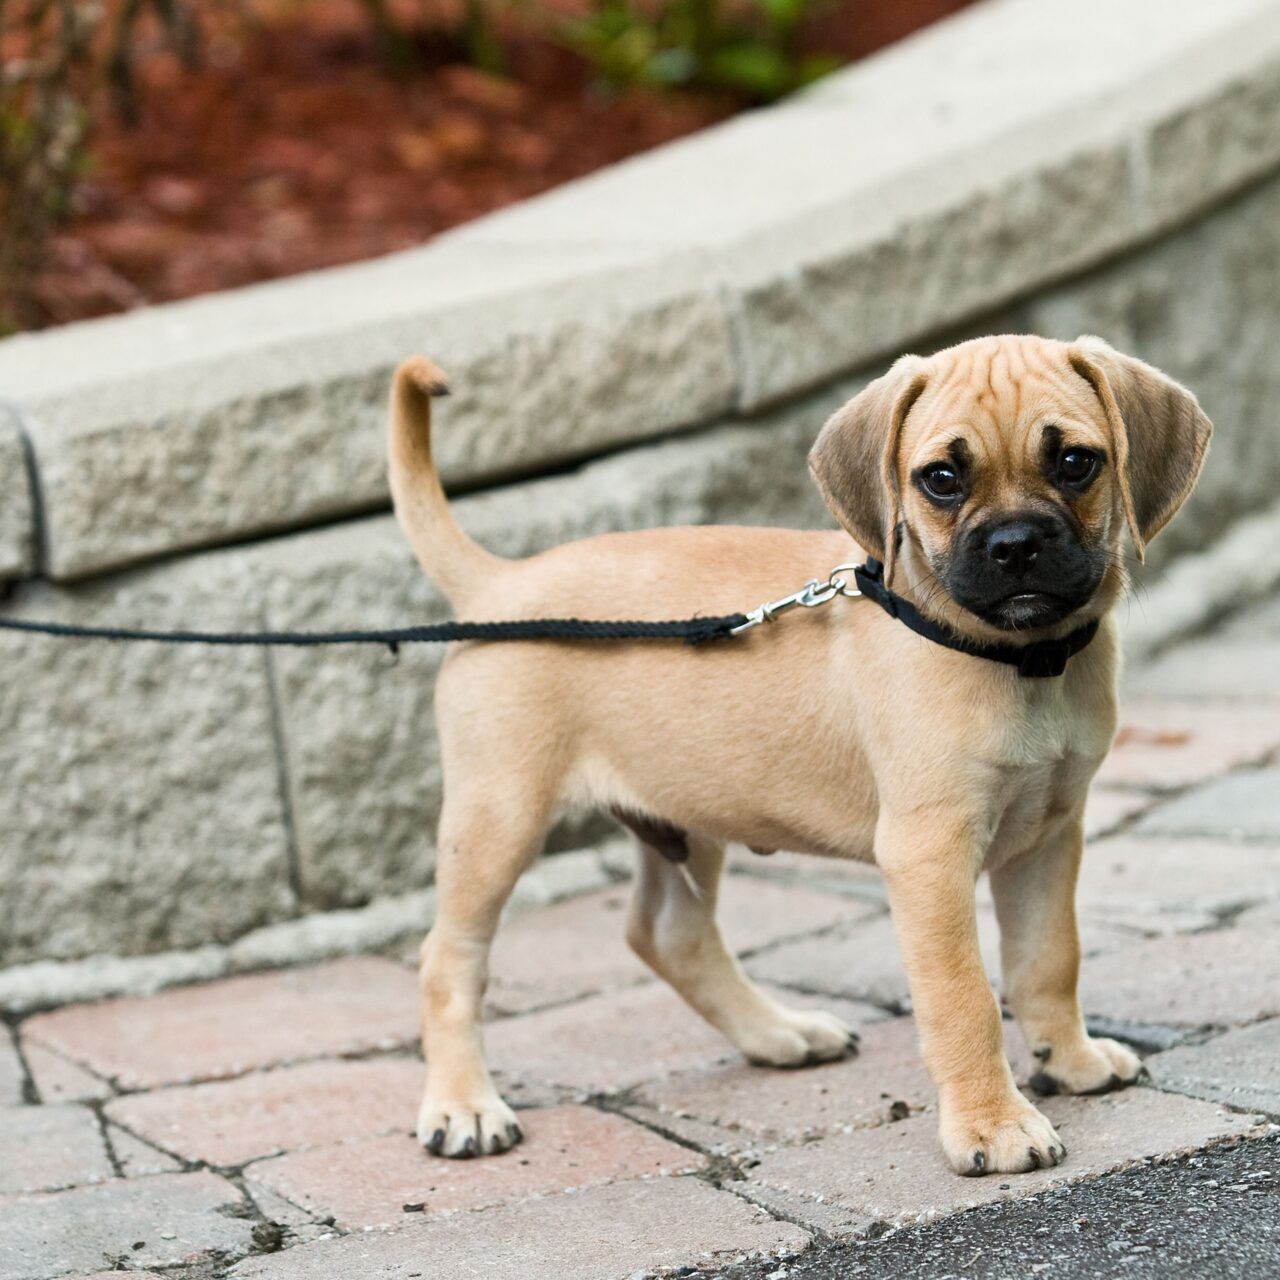 Puggle on lead in the street